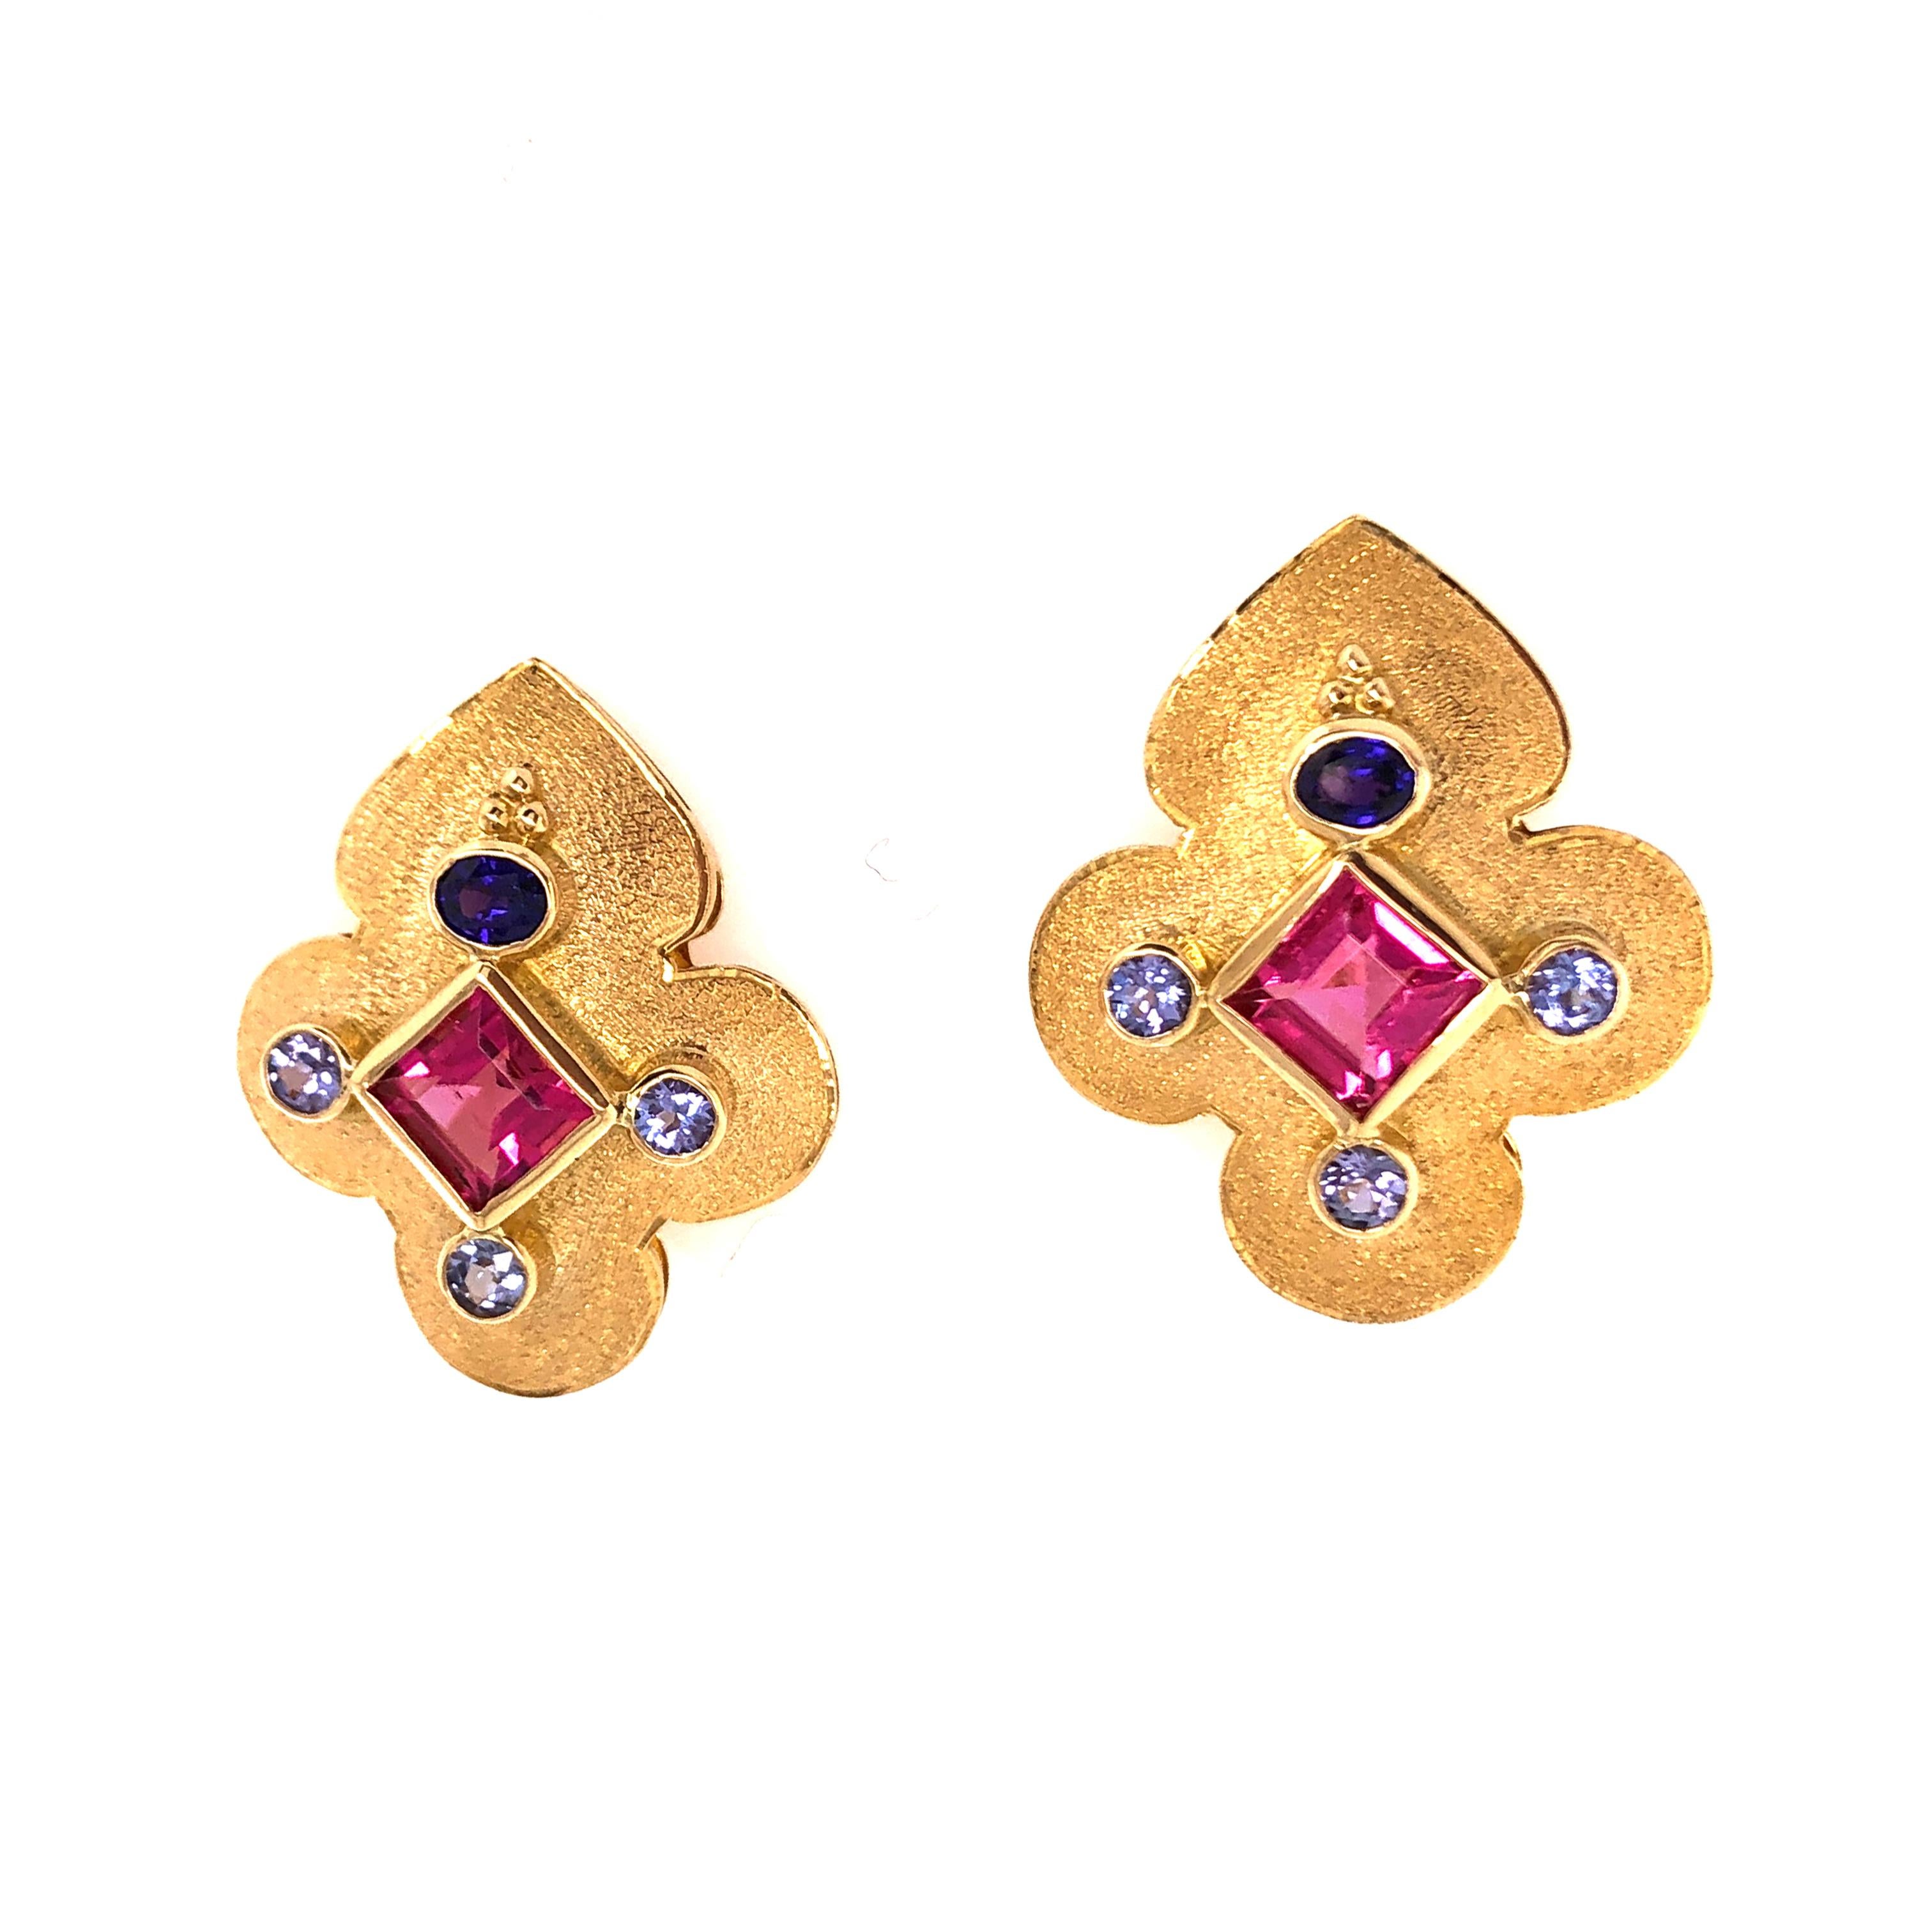 These super interesting Crevoshay 18K yellow gold Tanzanite and Pink Tourmaline earrings are it! They are sure to be a conversation starter anywhere you want to be noticed. 

Stamped: 18KT, (hallmark image)